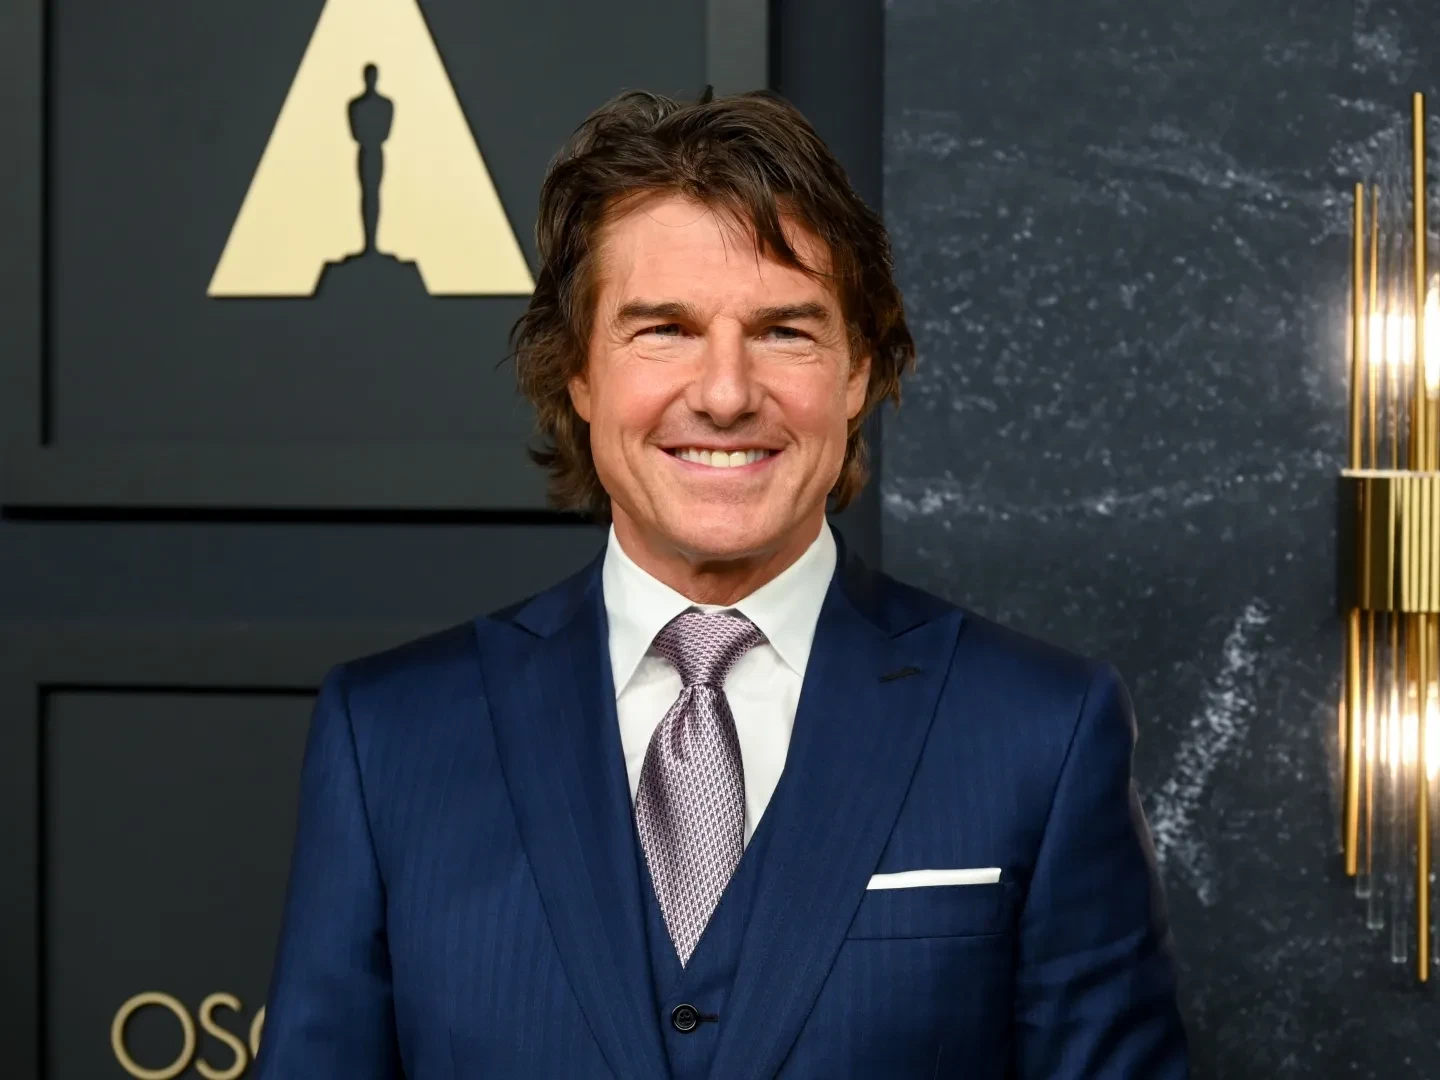 “He basically blew us a kiss”: Tom Cruise Earned Humongous $20M from ...